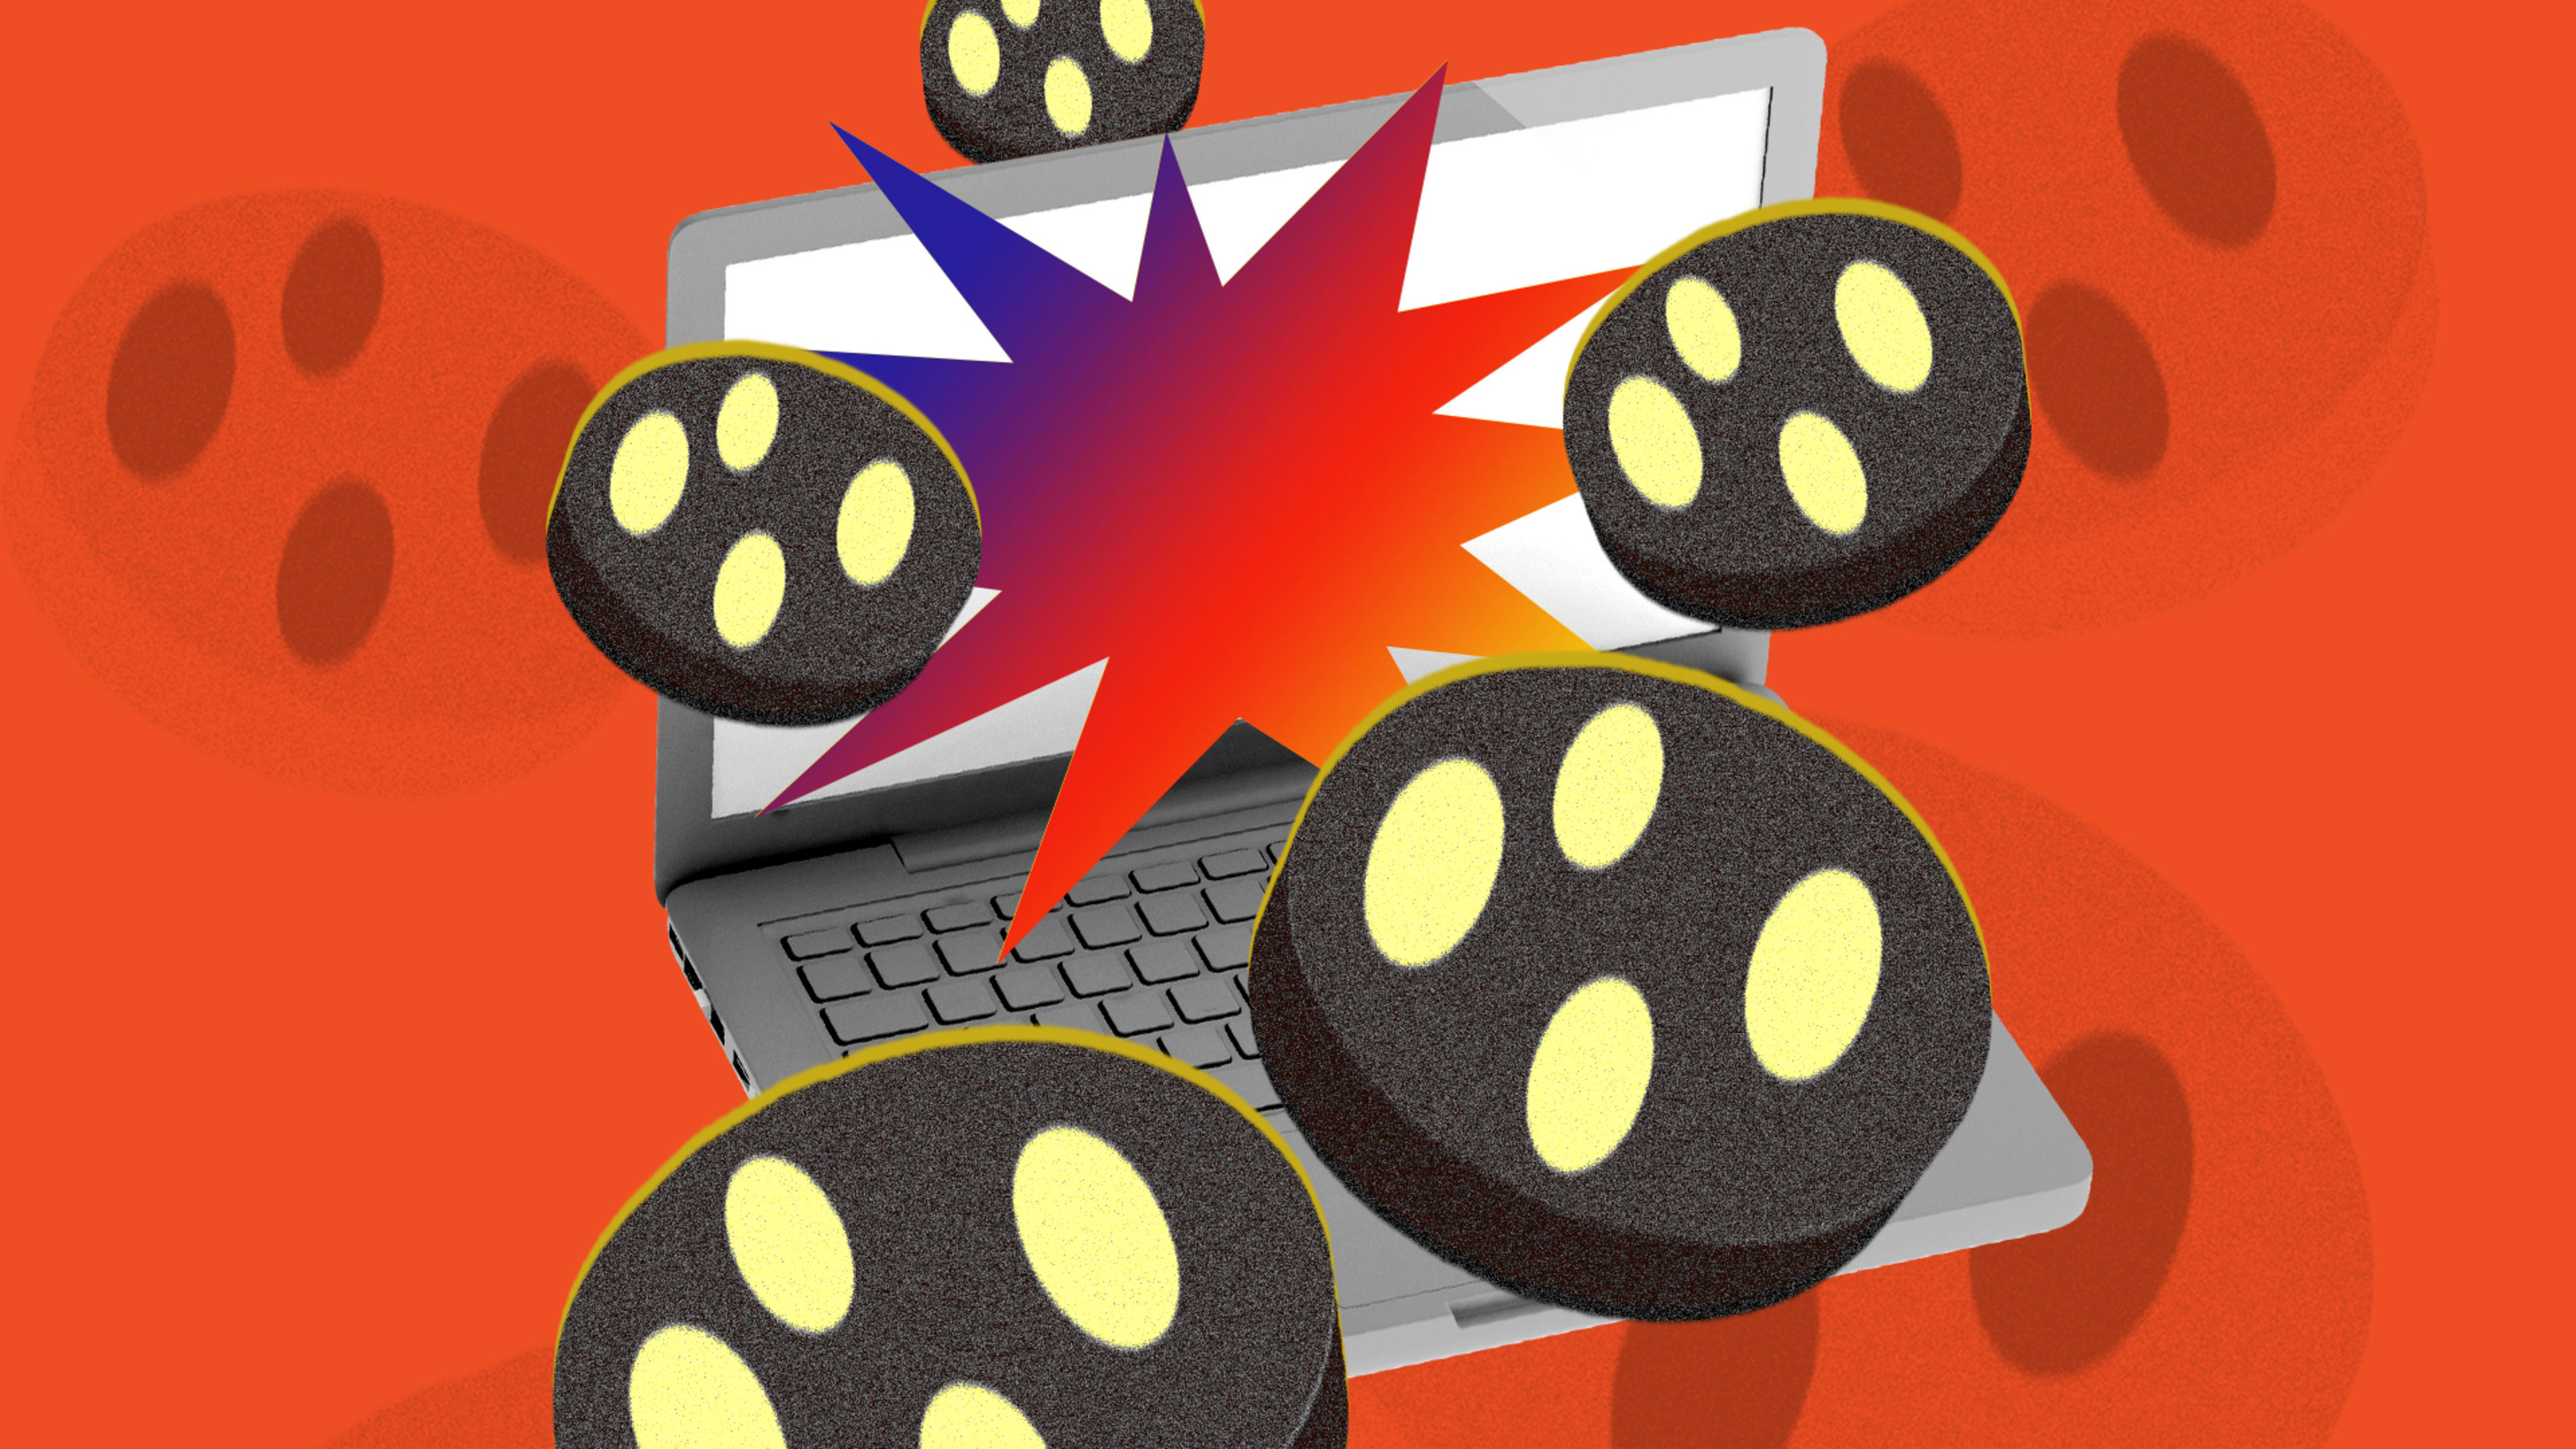 Browsers are rushing to stop shadowy ‘supercookies’ that spy on your activity